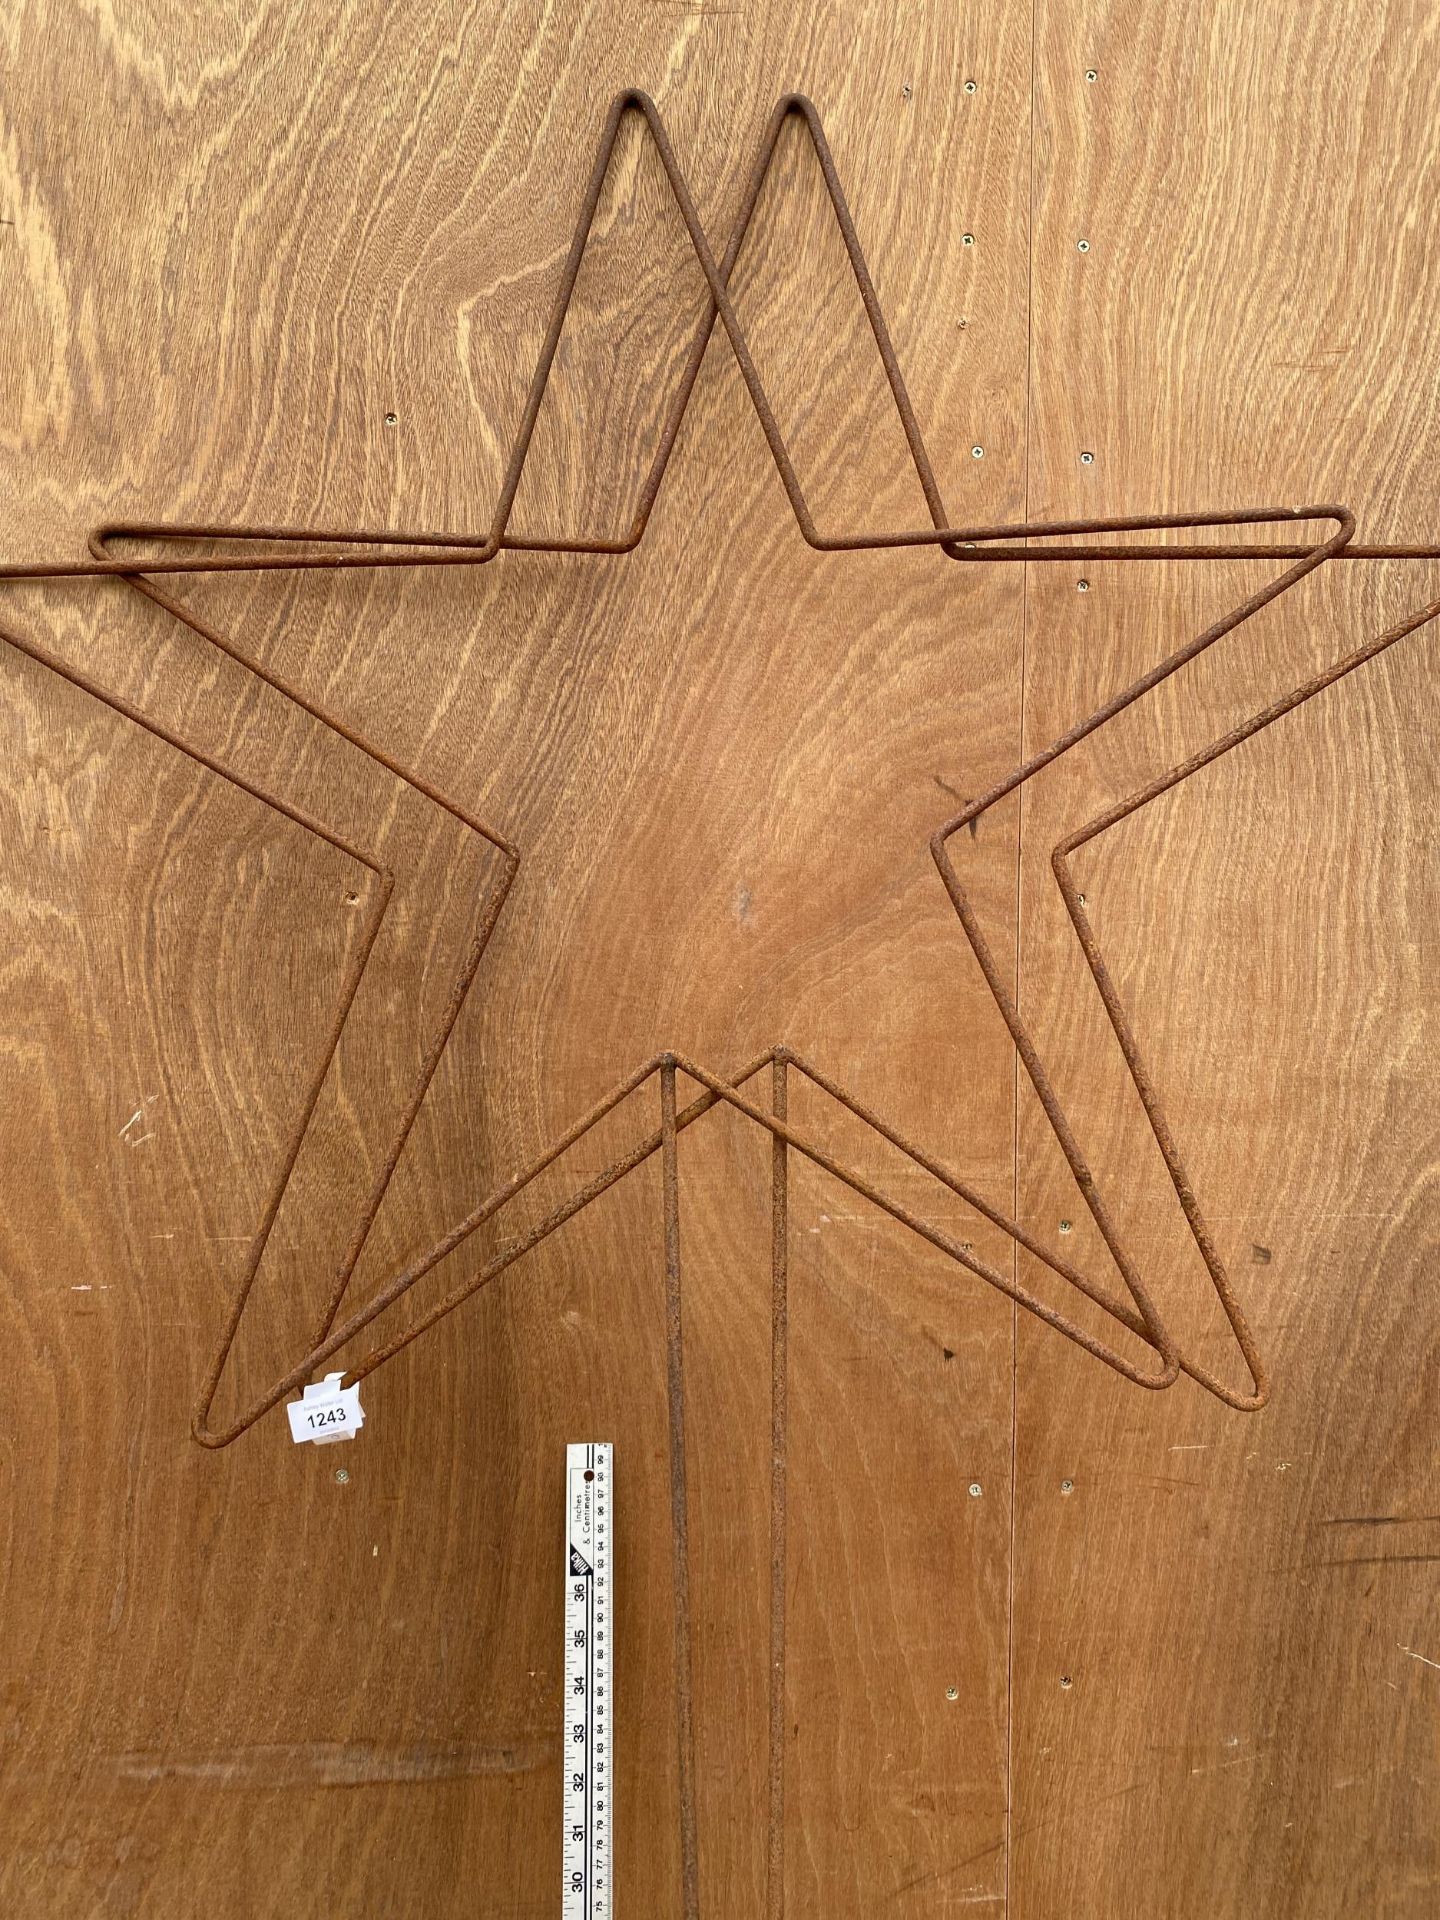 A PAIR OF DECORATIVE WROUGHT IRON STAR SHAPED PLANT SUPPORTS/GARDEN FEATURES - Image 2 of 3